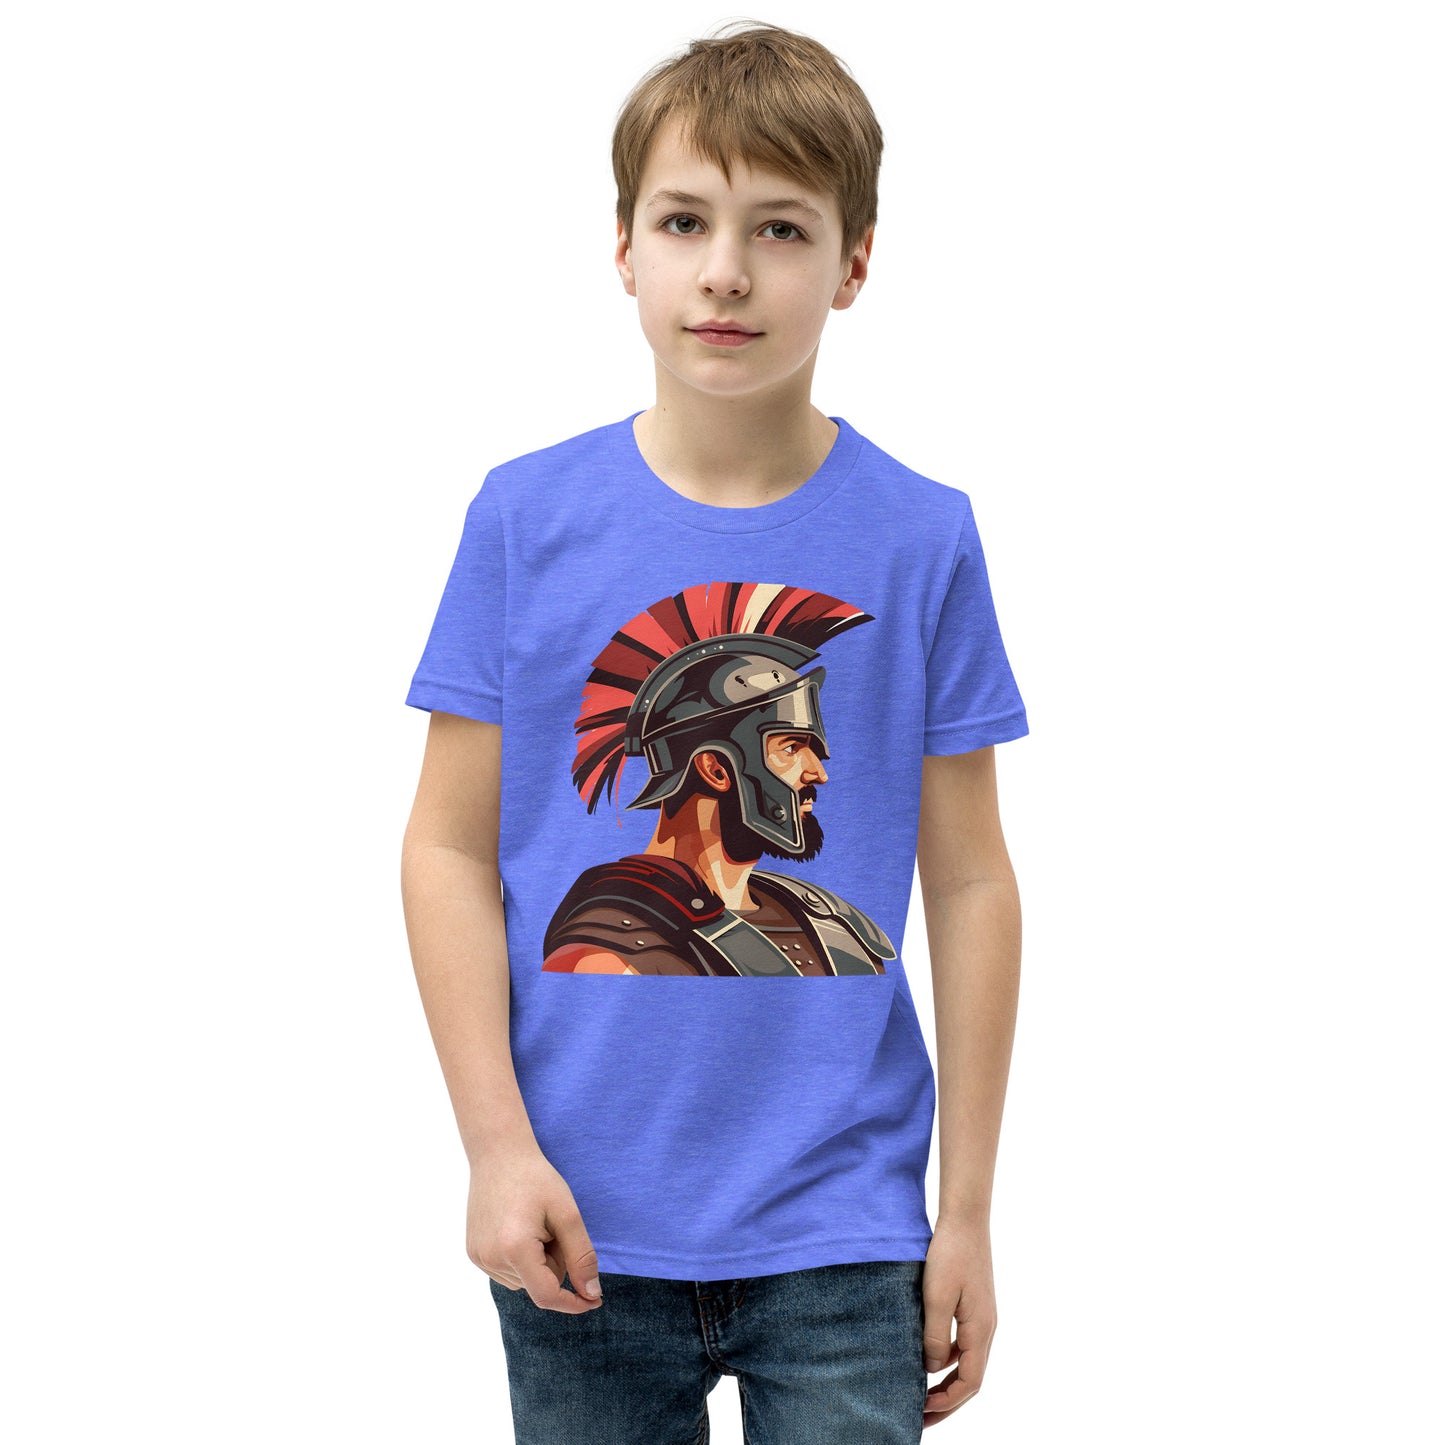 Teenager with a Columbia blue T-shirt with a print of a warrior